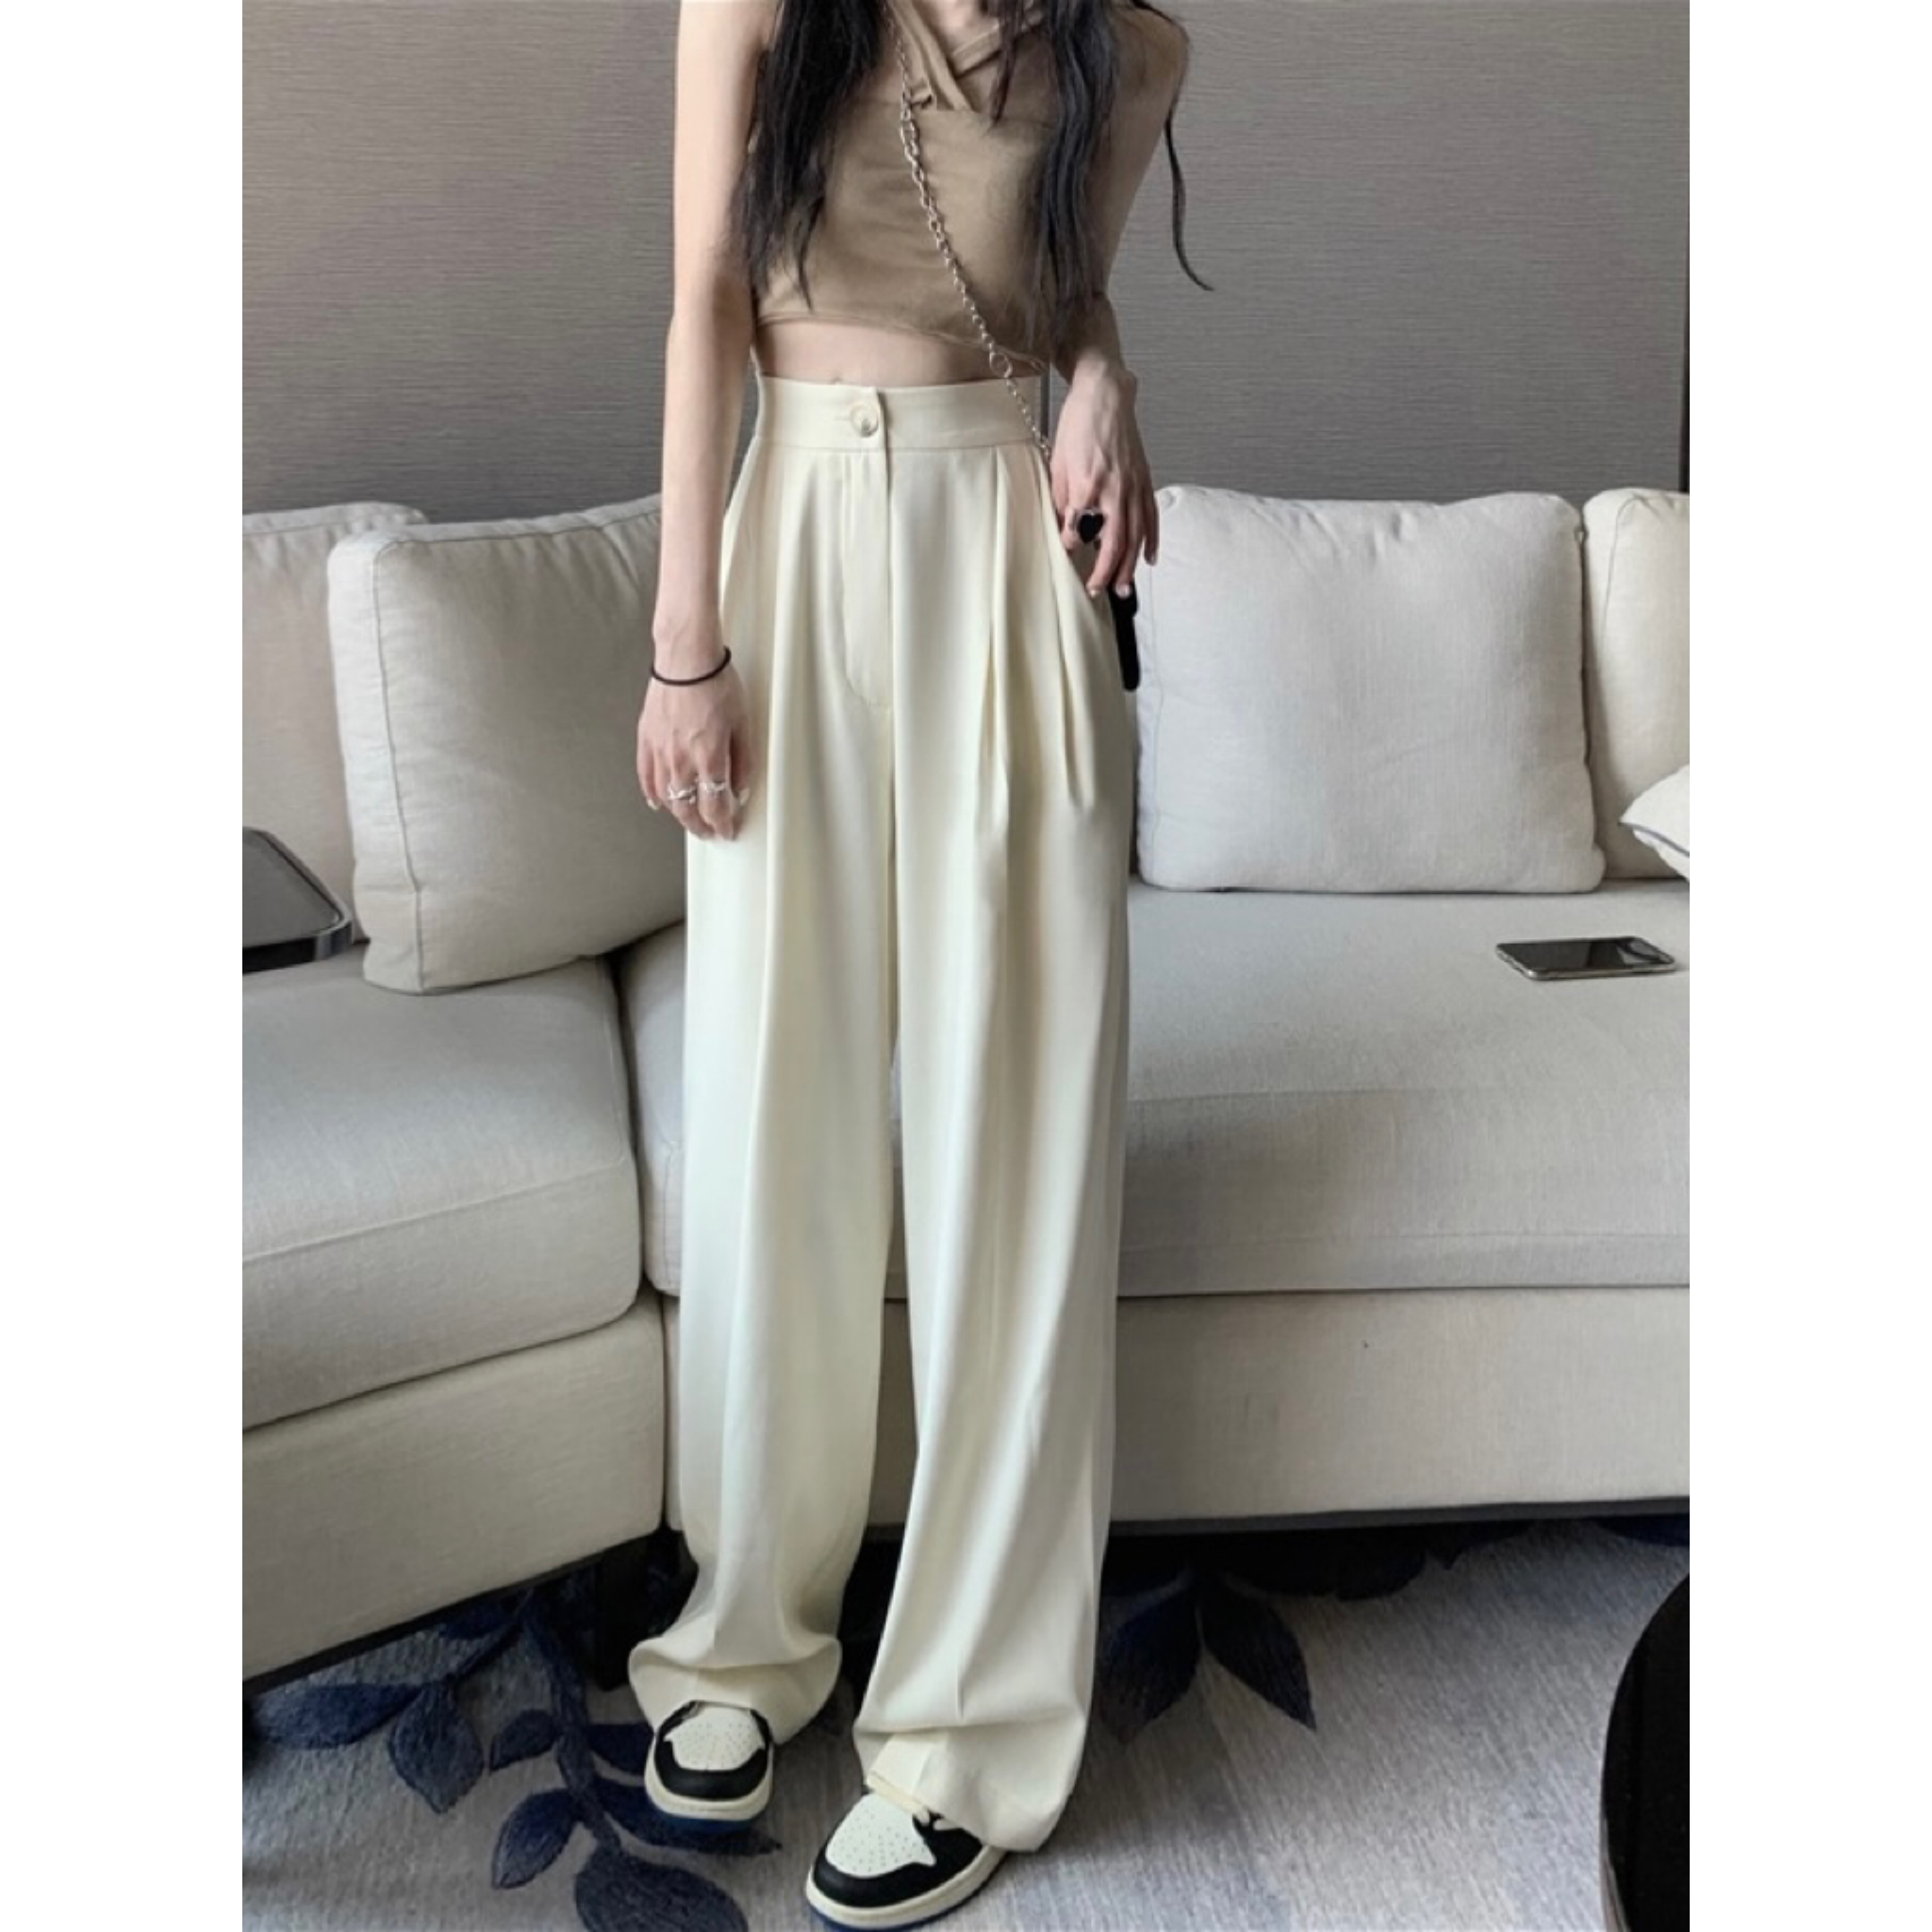 Real shot!  Korean style chic retro Hong Kong style high waist drape trousers for women loose slimming suit pants casual pants